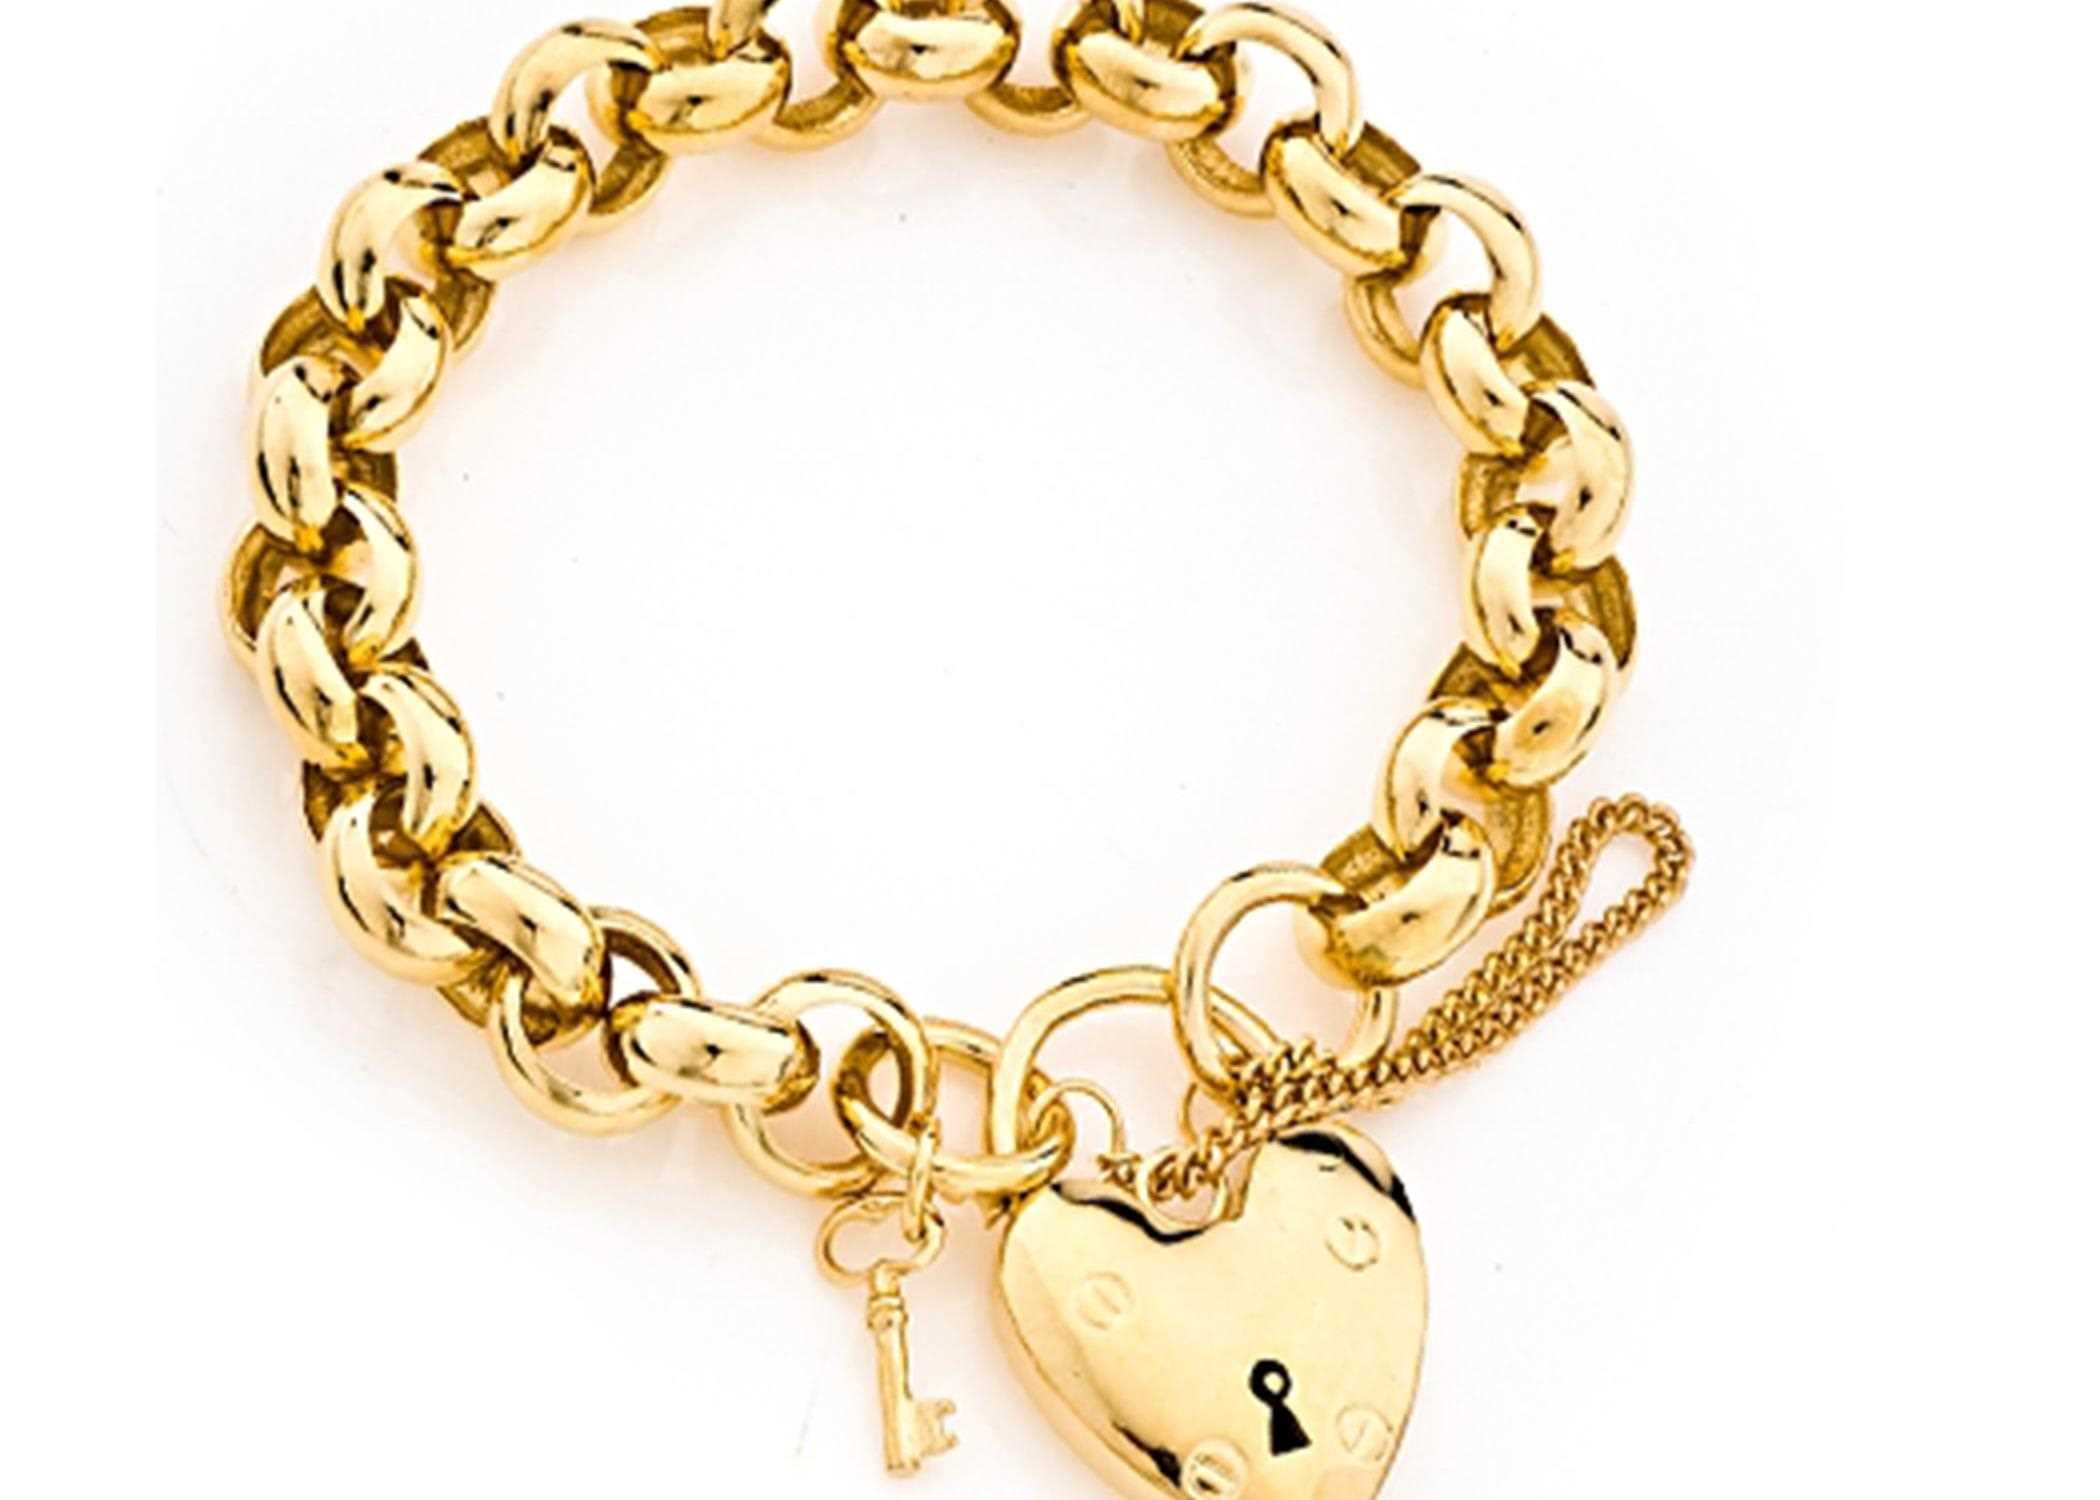 Gold Plated Heart Lock and key Charm Bracelet